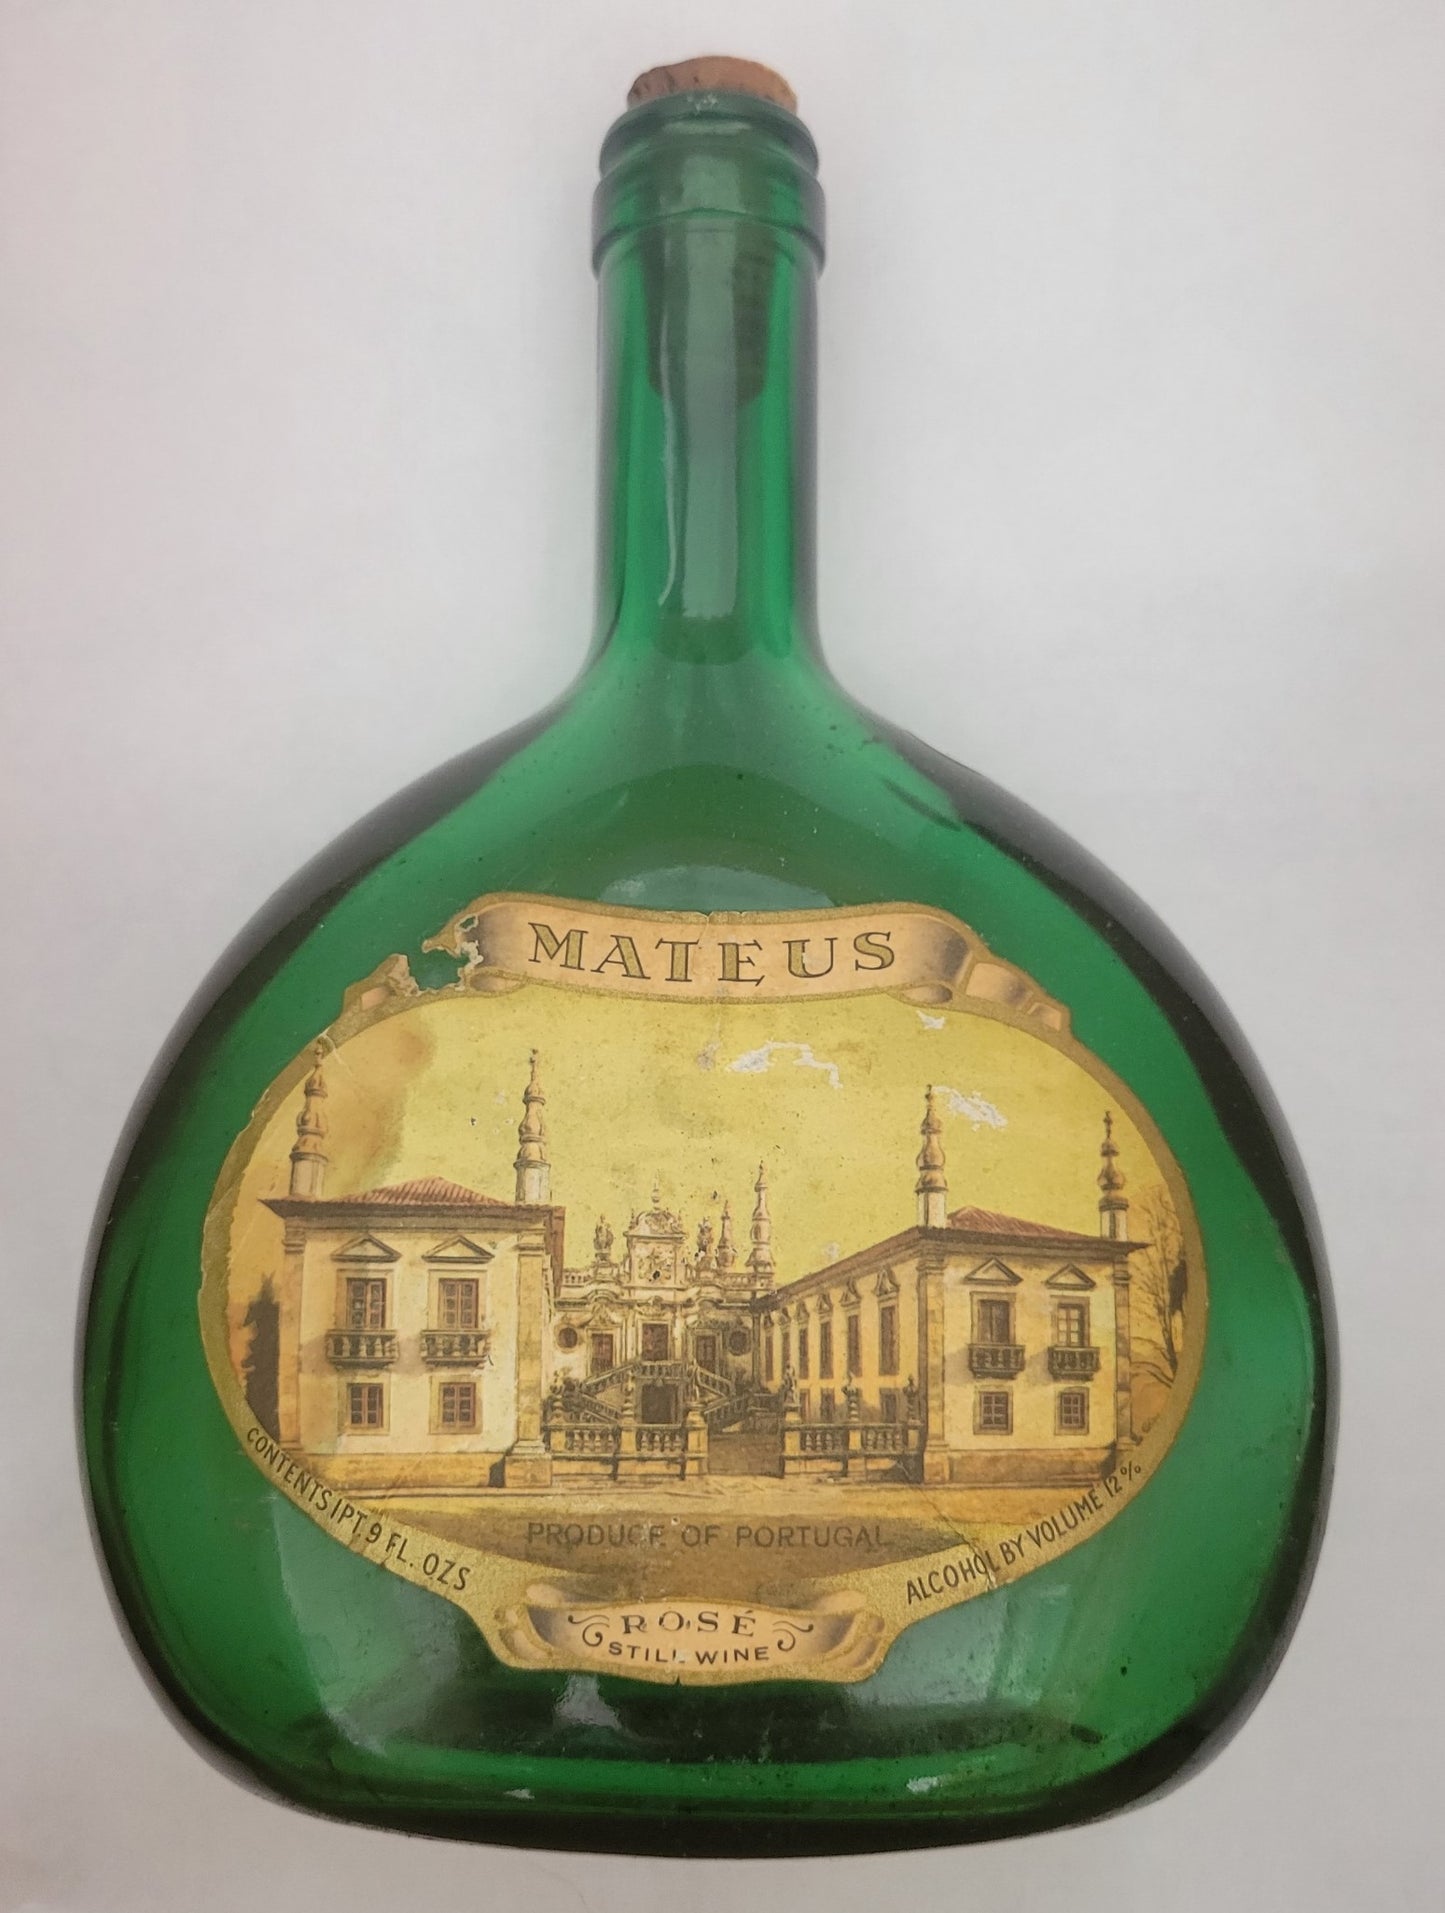 Vintage Rose Still wine bottle by Mateus, made in Portugal. Front view.